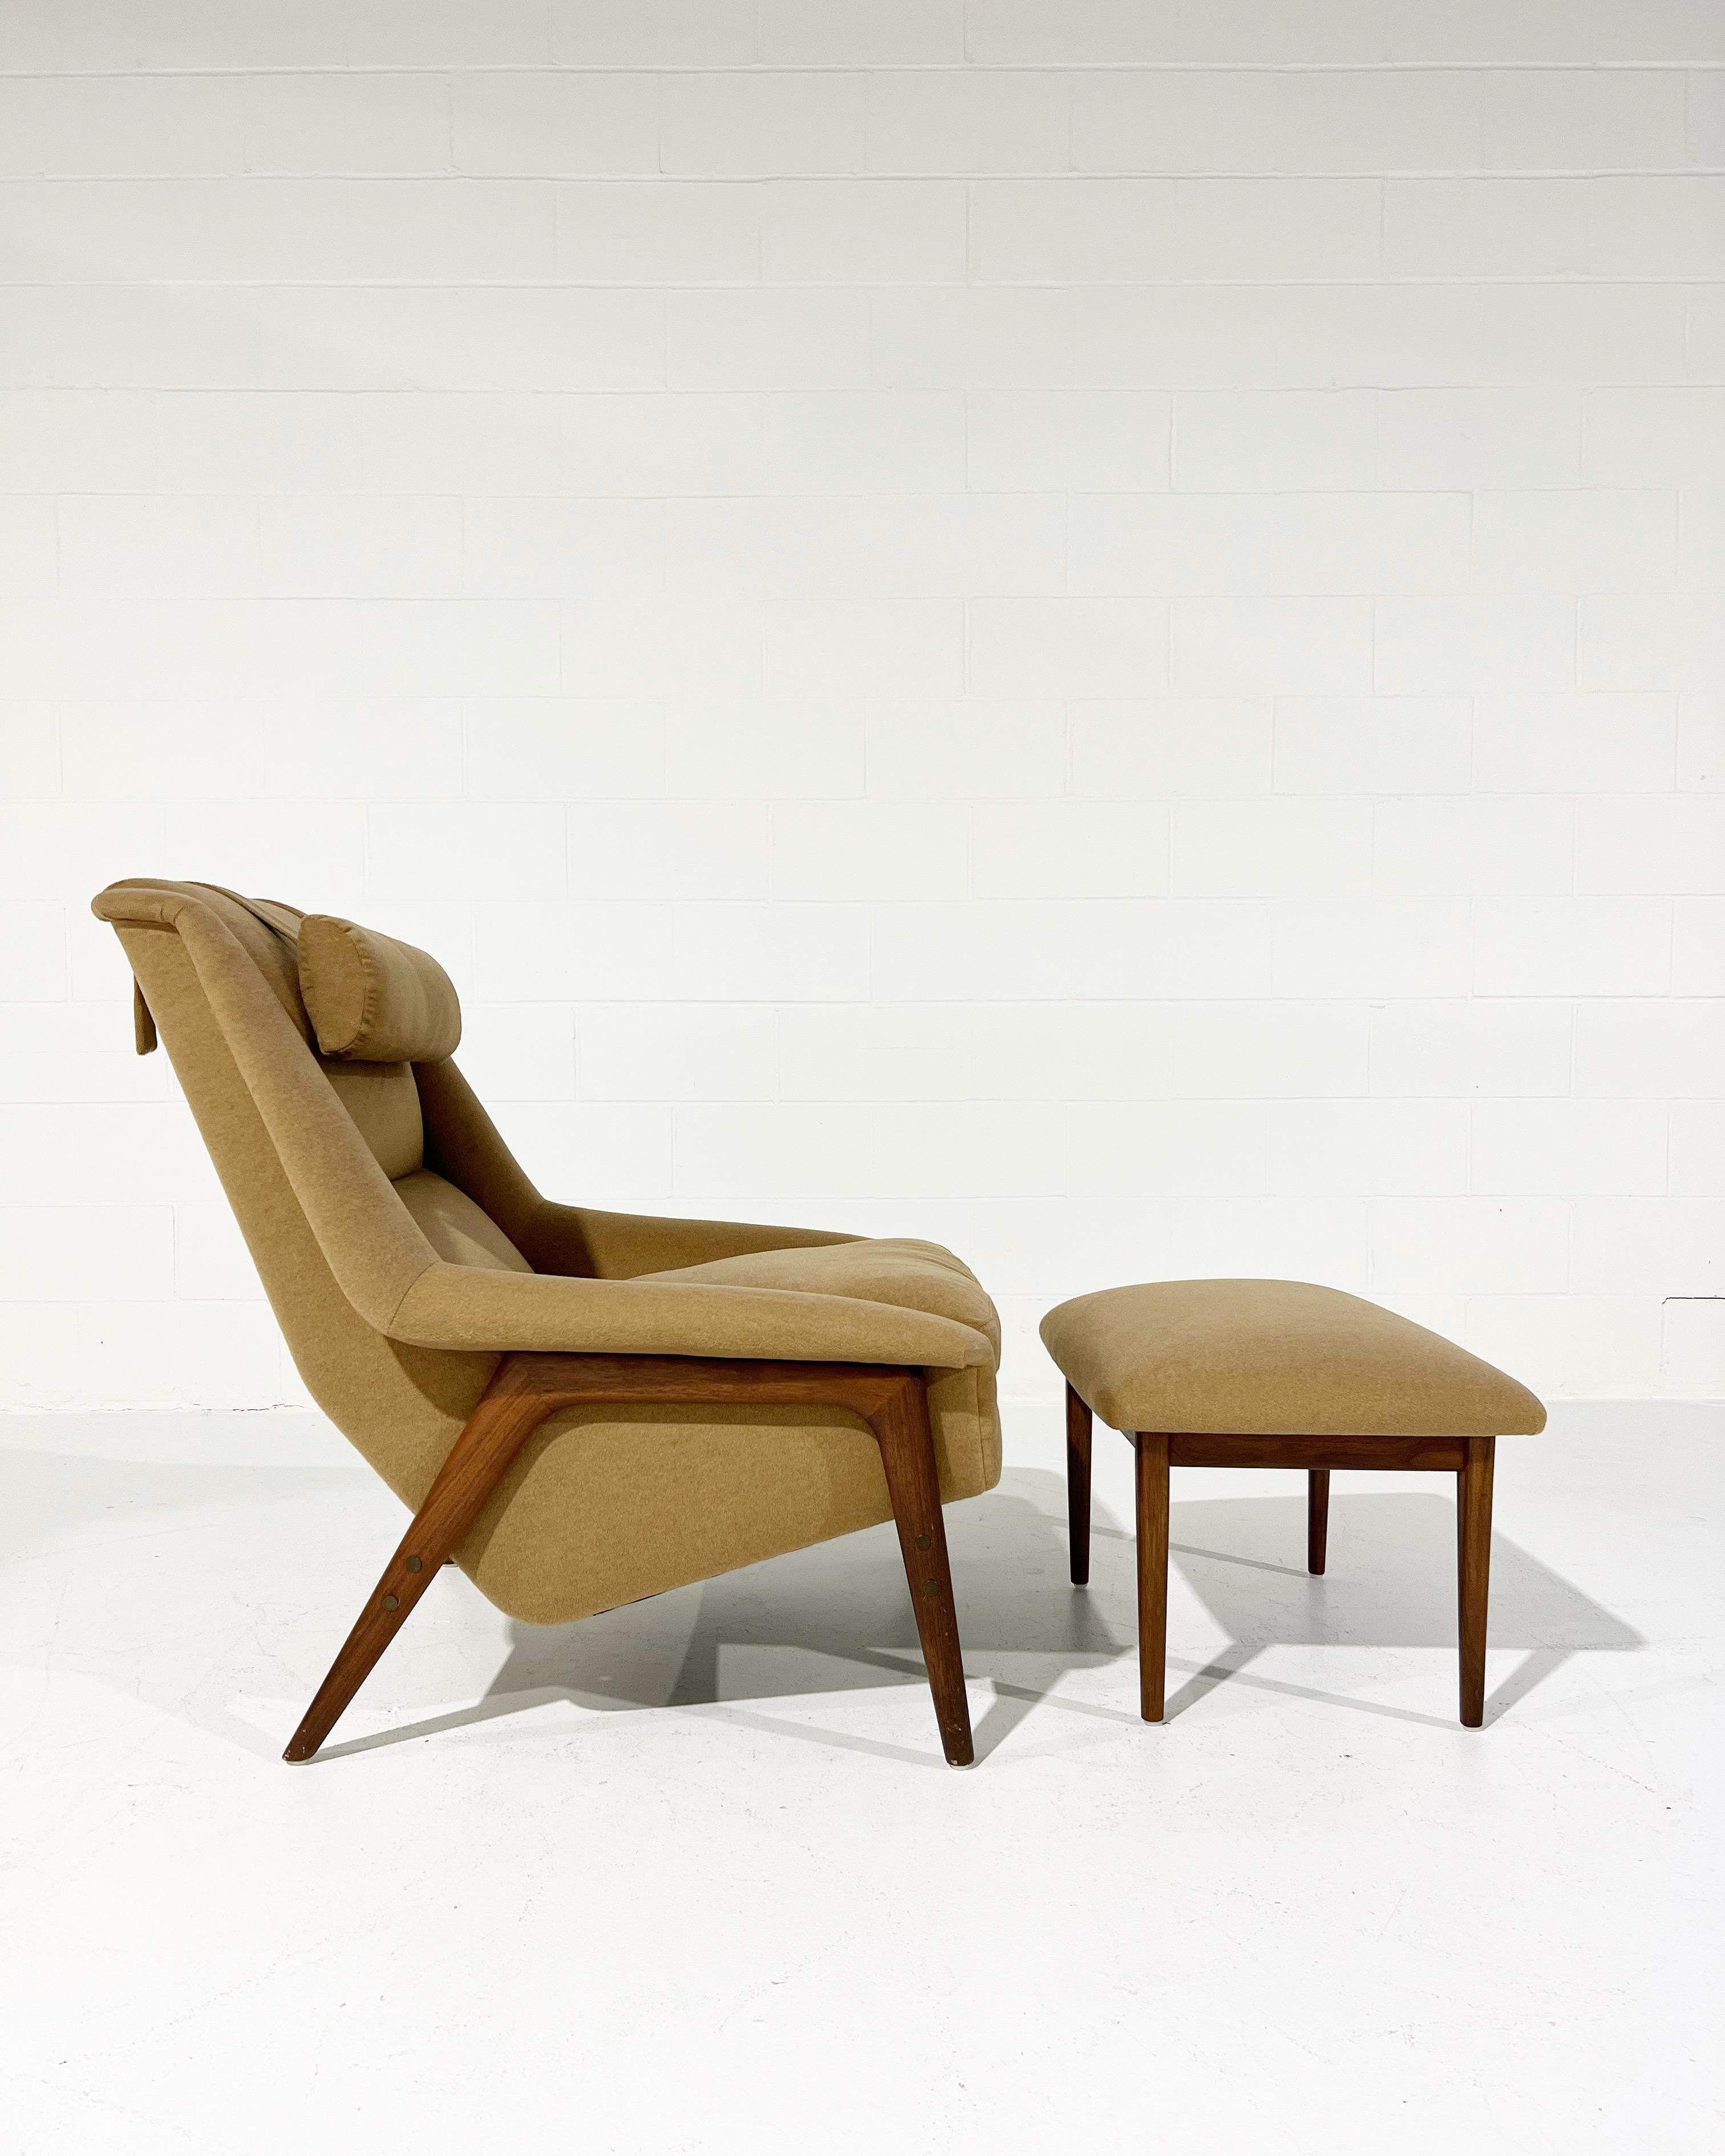 Fabric Folke Ohlsson Lounge Chair and Ottoman in Loro Piana Cashmere